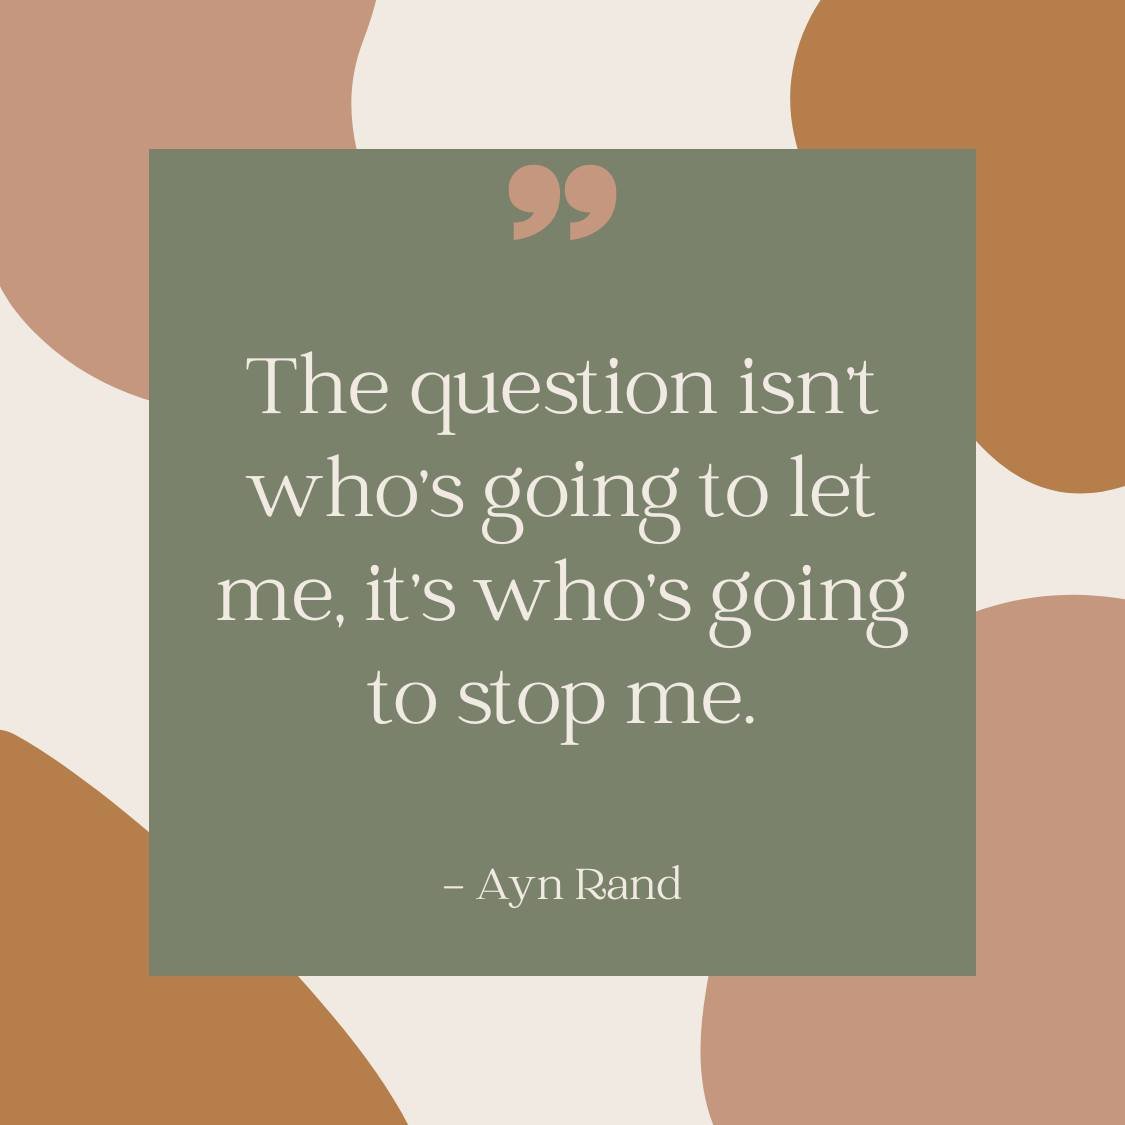 Closing out the week with a reminder from Ayn Rand: the only thing standing between us and our dreams is our own determination. Let's channel that unstoppable energy and finish this week with a bang! Share any wins or ah-ha moments you had in the com